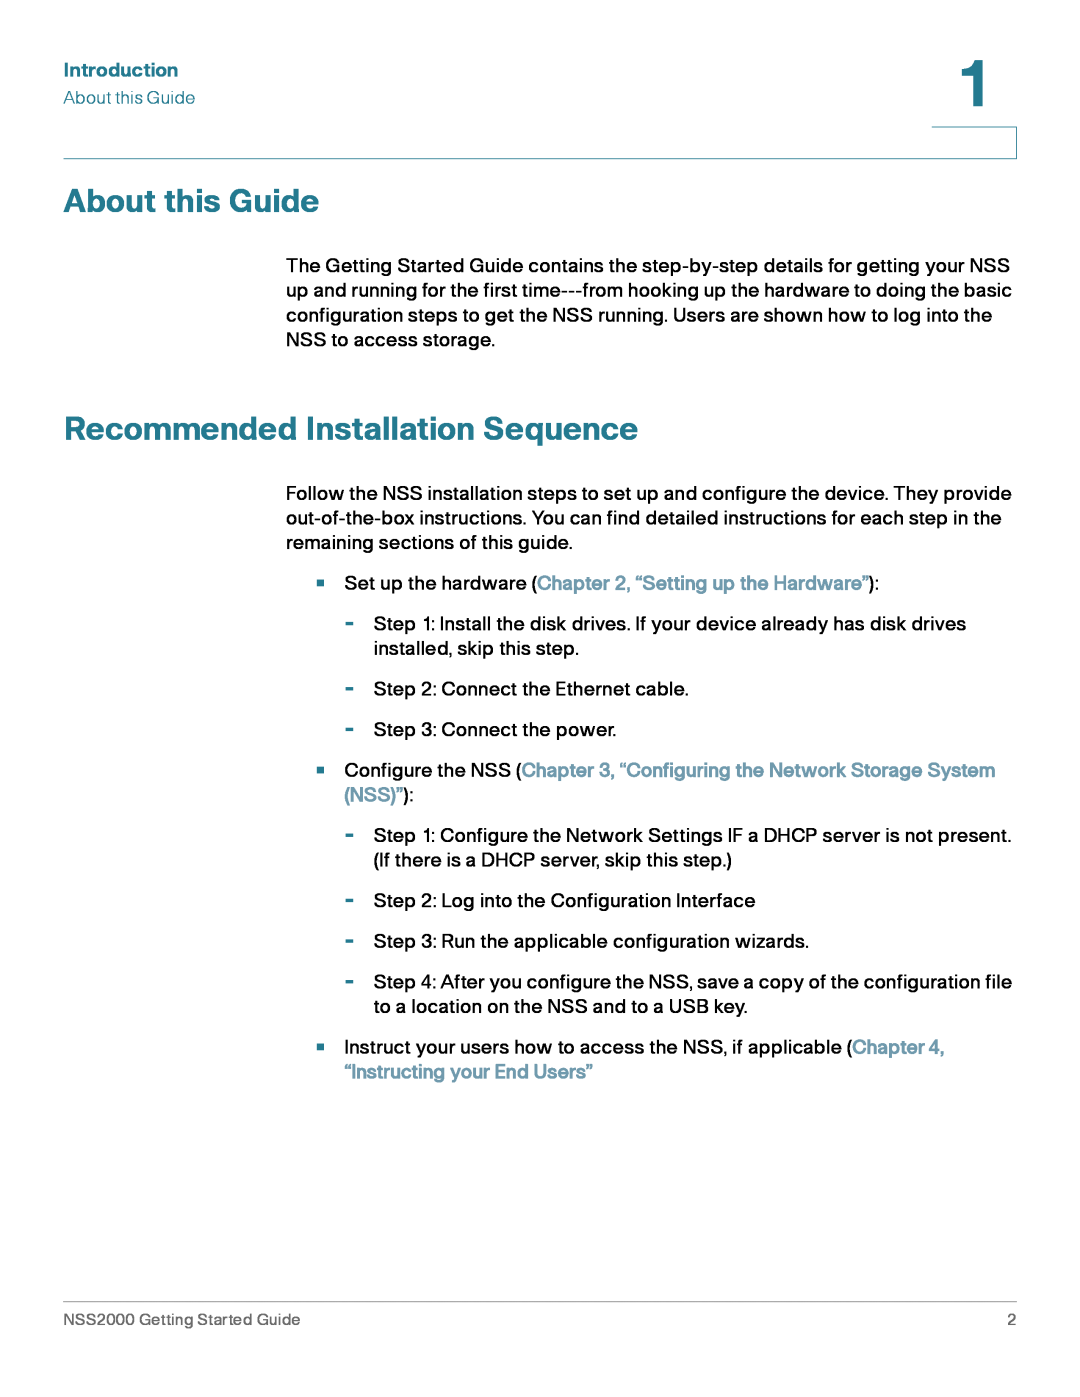 Cisco Systems NSS2000 Series manual About this Guide, Recommended Installation Sequence, Introduction 